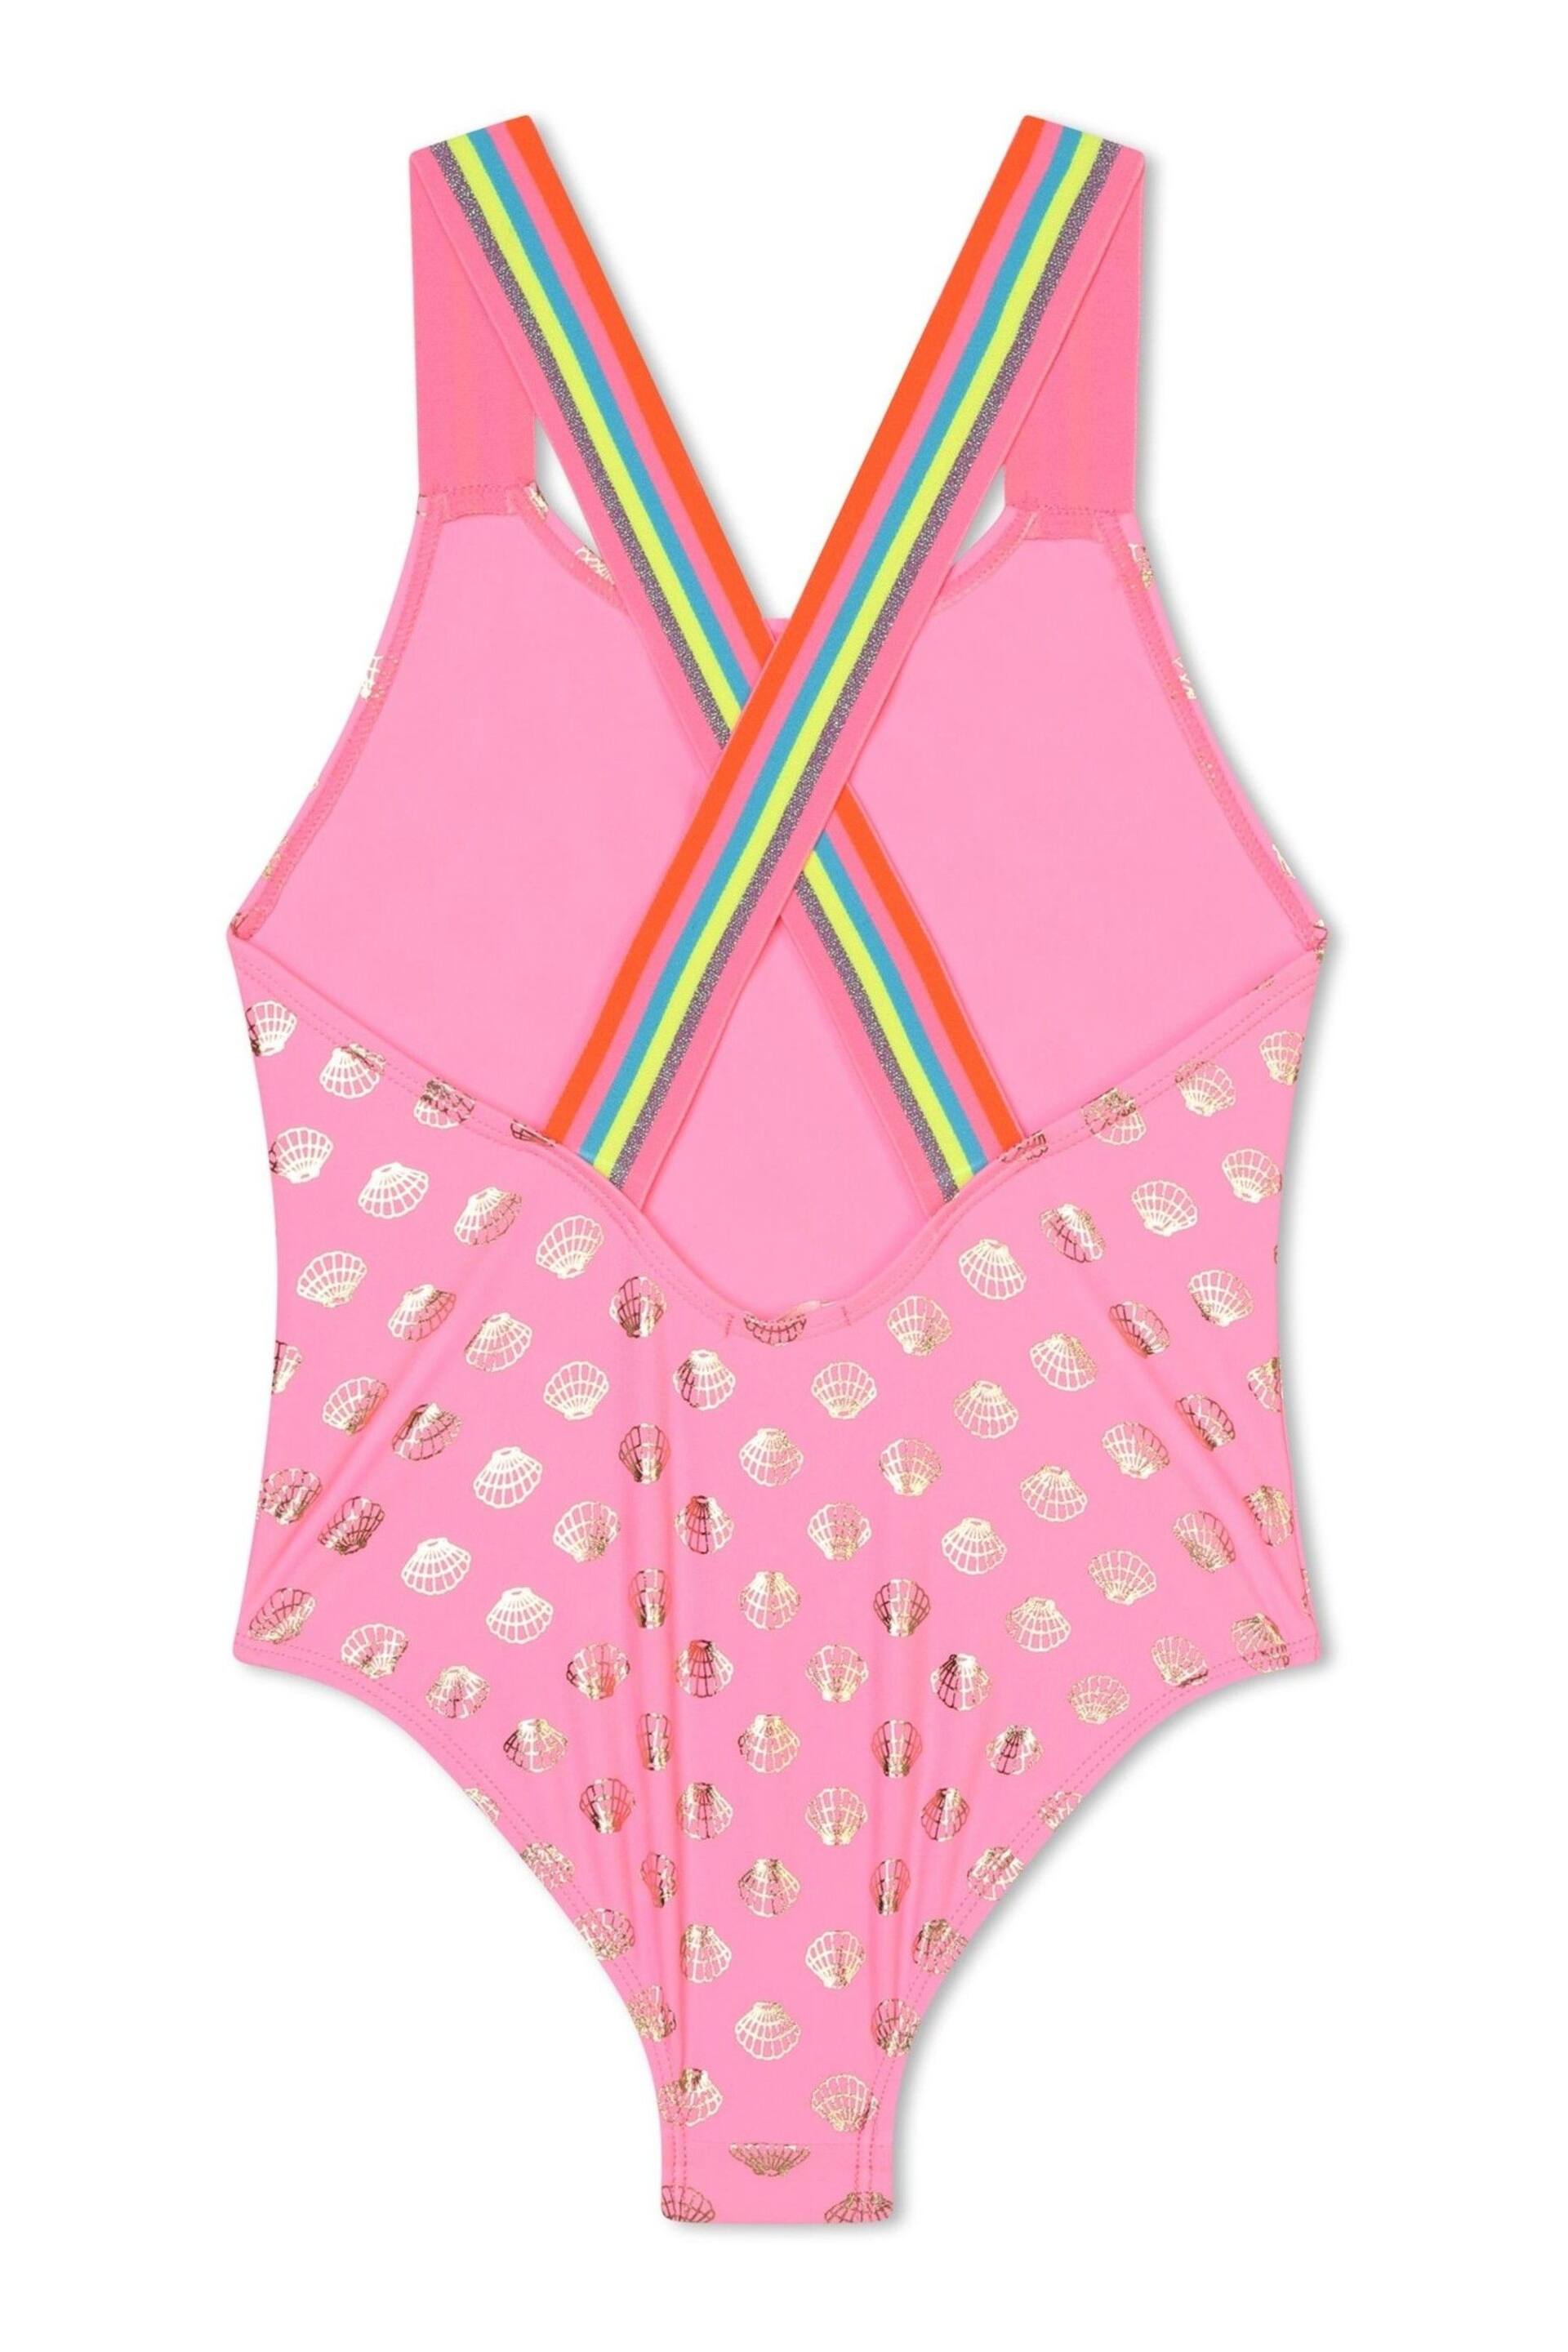 Billieblush Pink Swimsuit With Gold Foil Seashell Print - Image 2 of 3